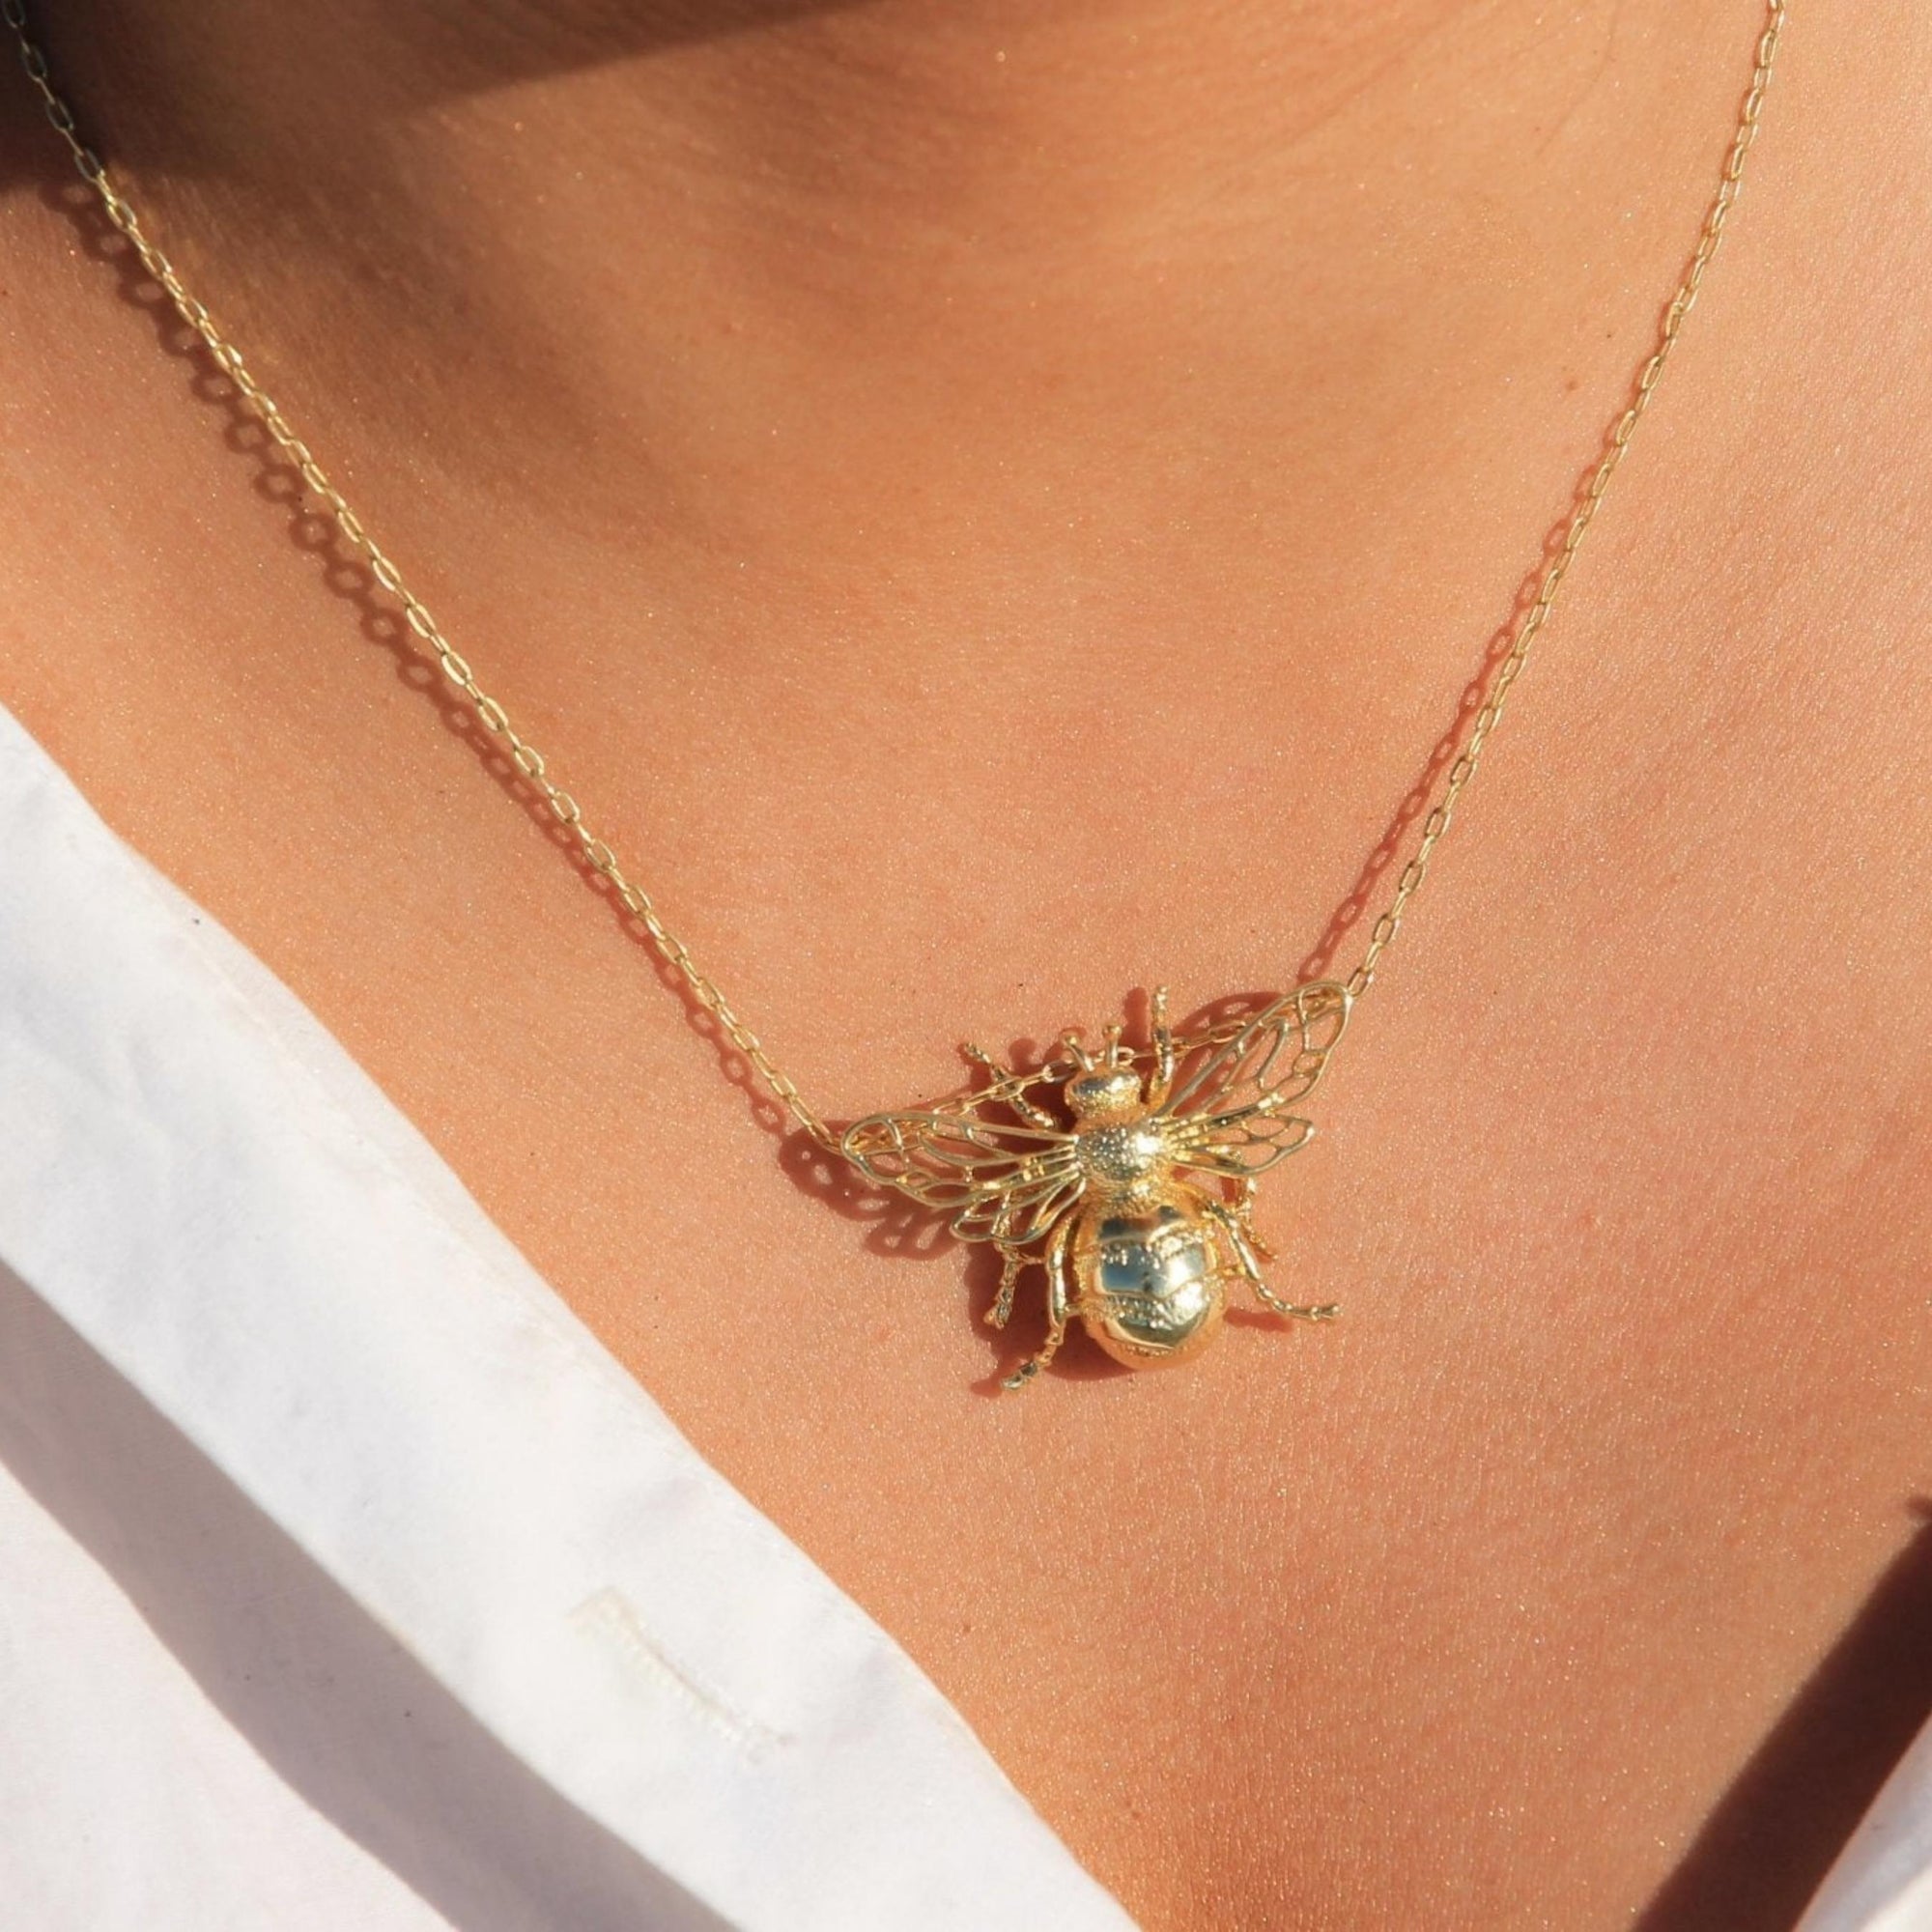 GOLD BEE NECKLACE